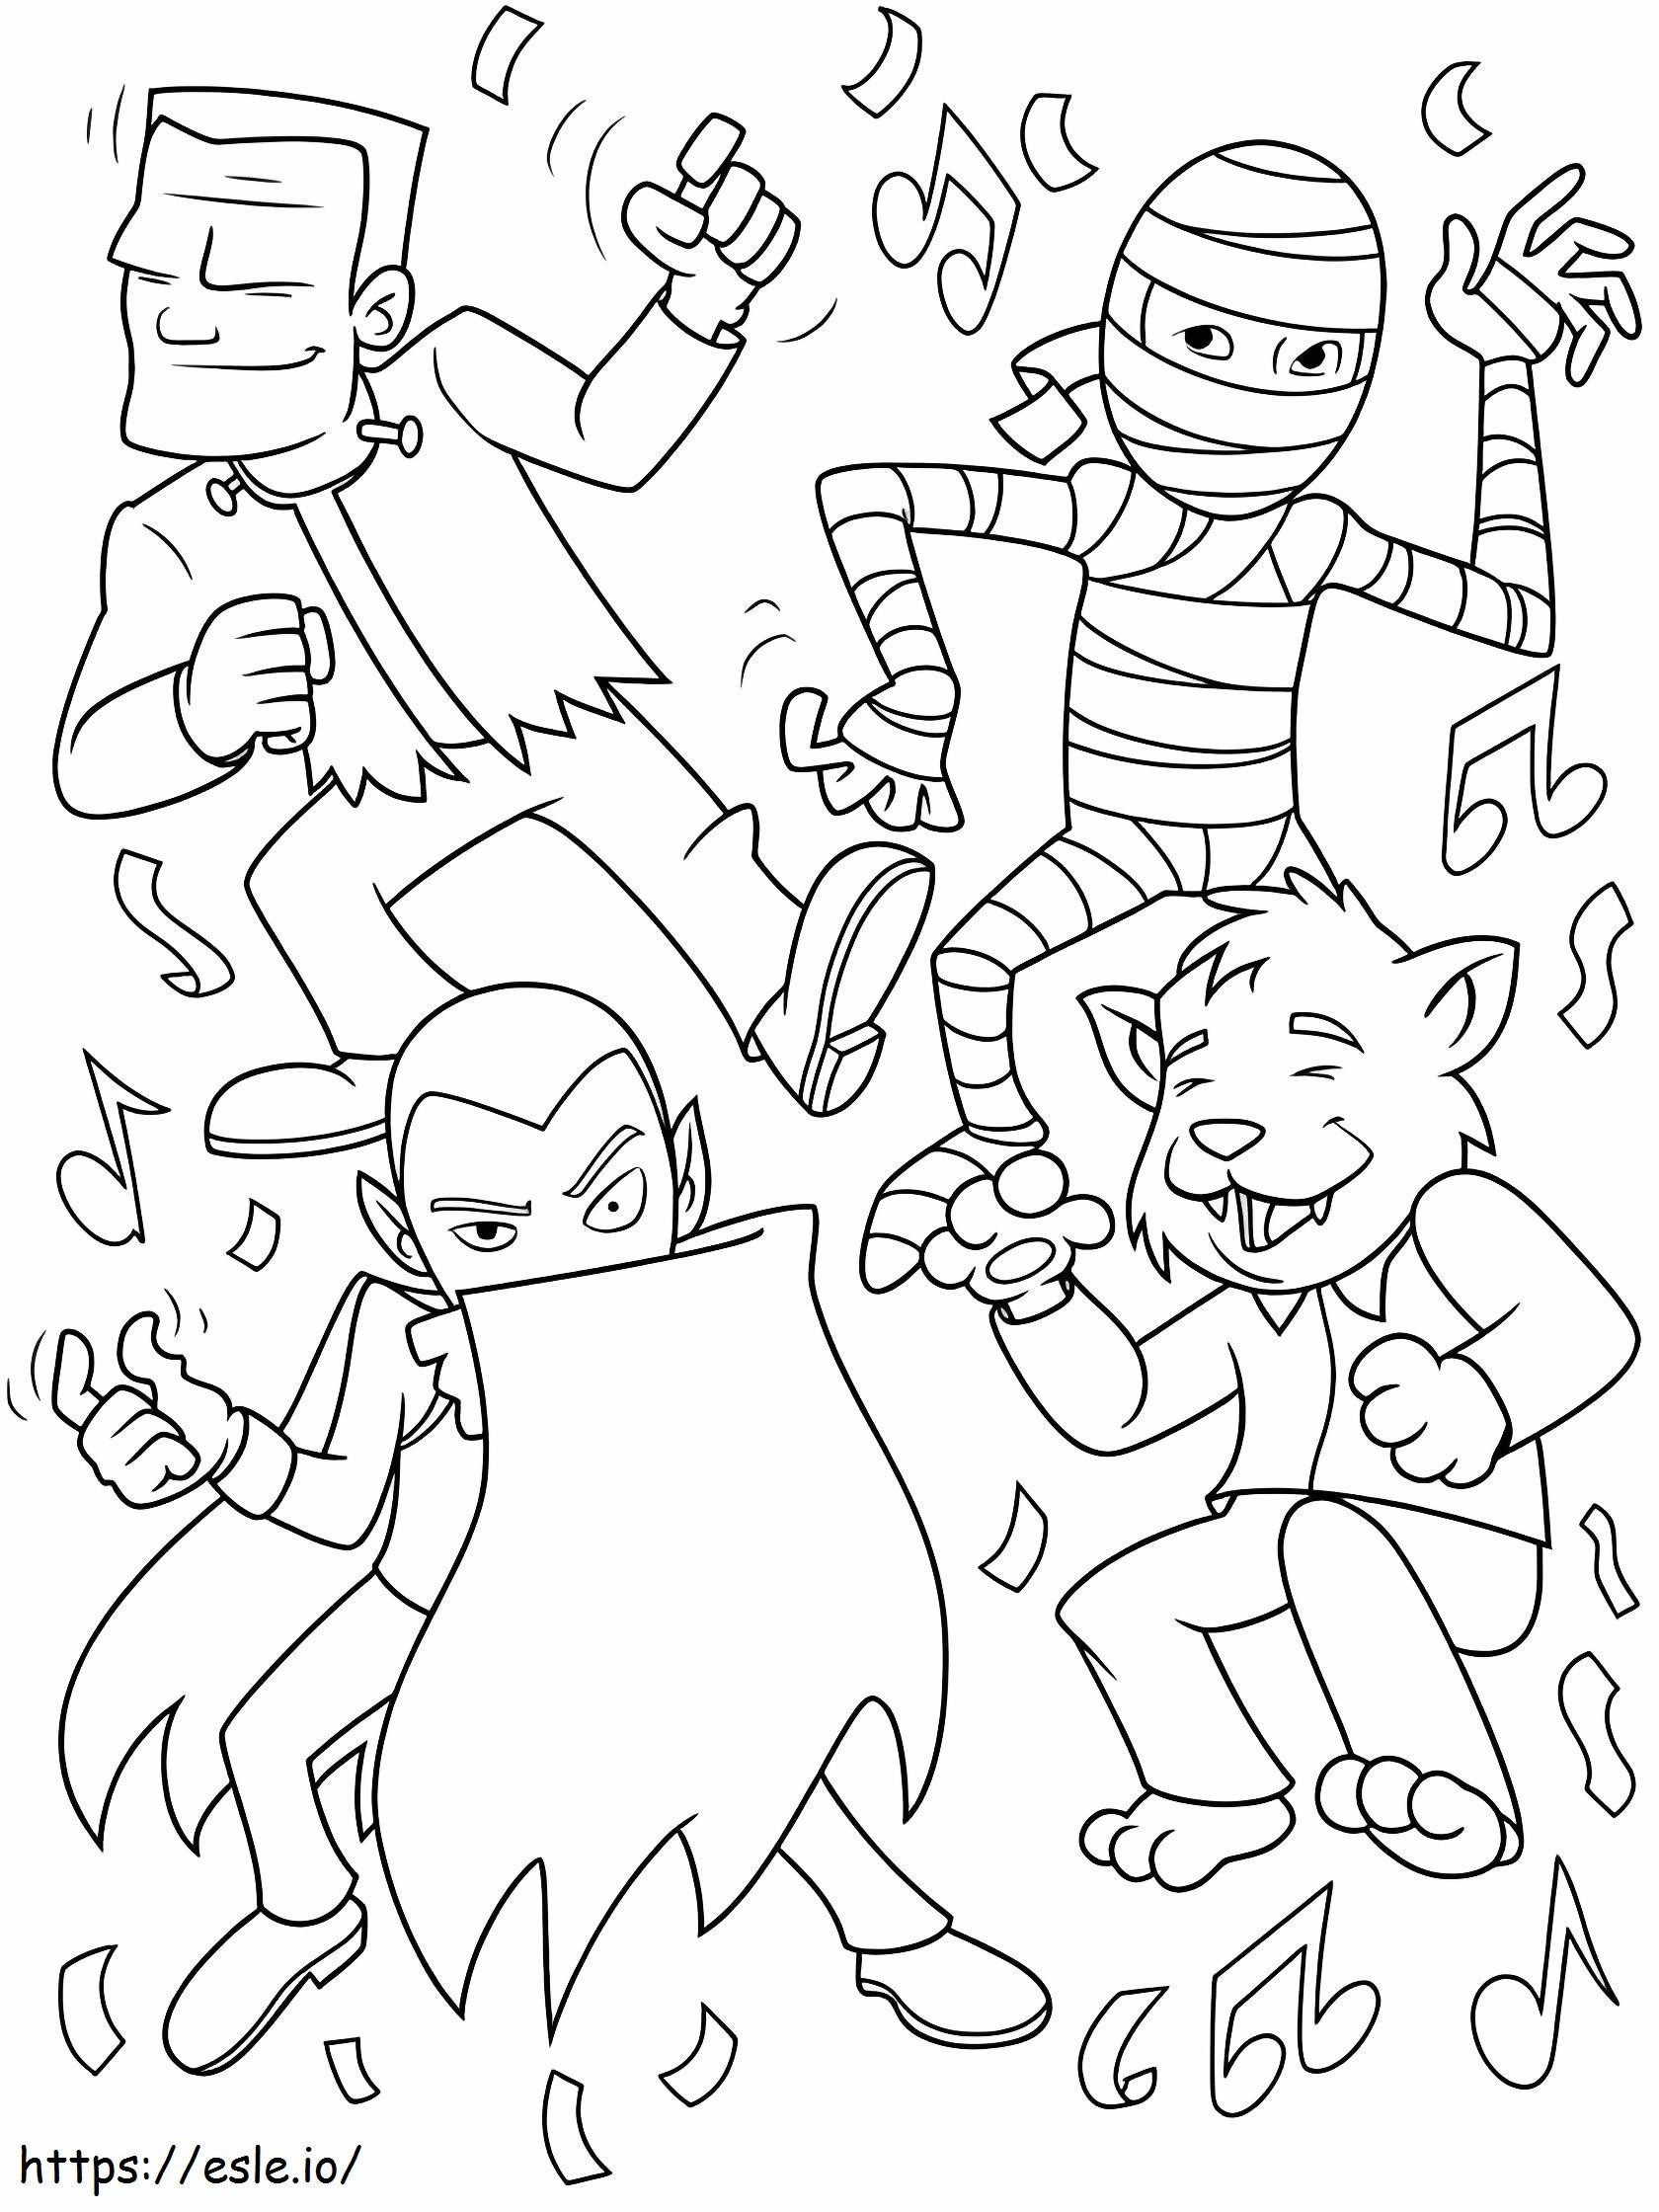 Four Monsters Dance At A Party coloring page